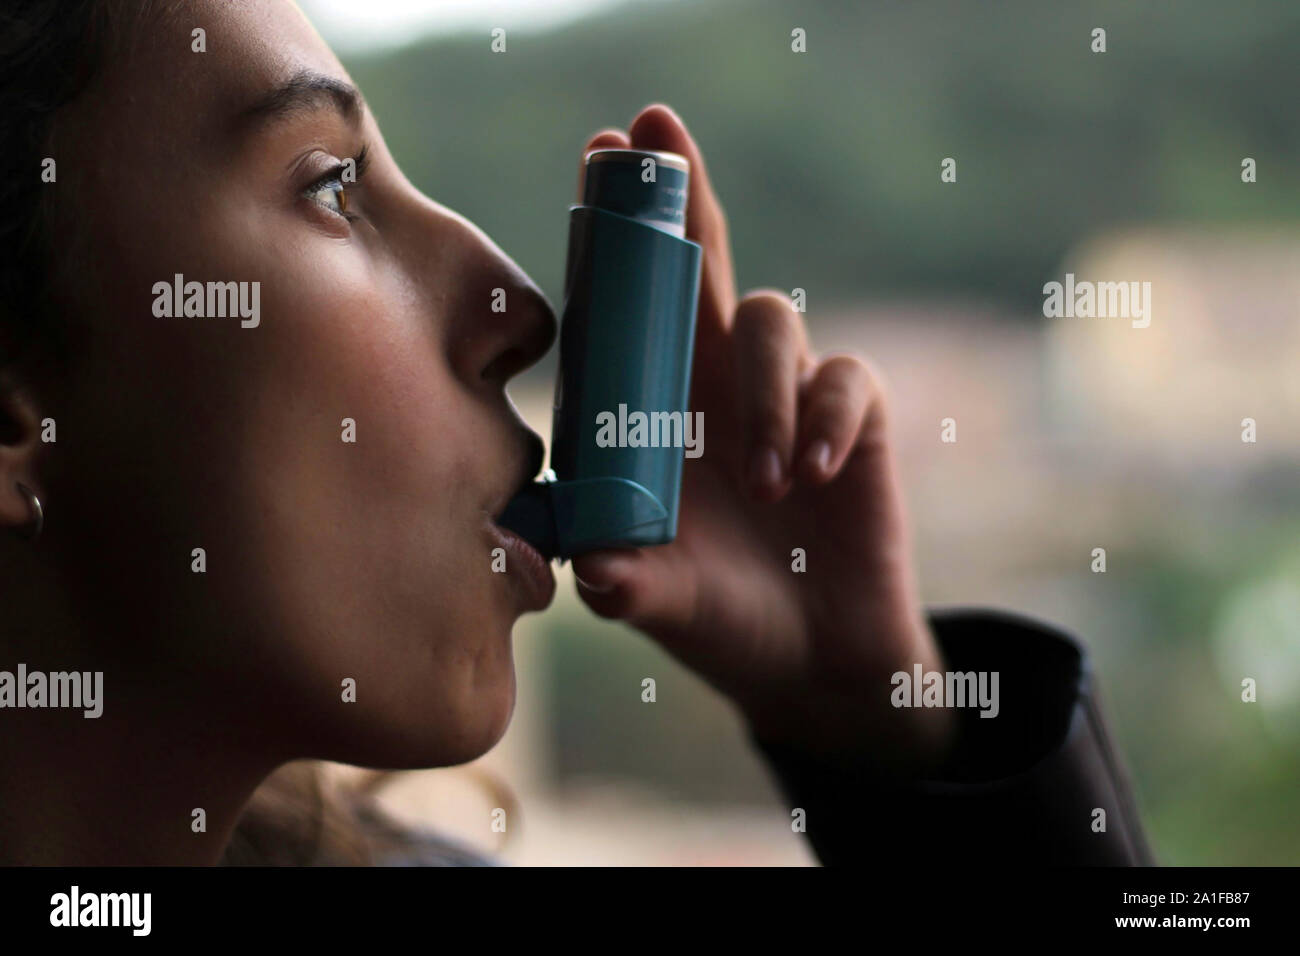 Health and medicine - Young girl using blue asthma inhaler to prevent an asthma attack. Pharmaceutical product to prevent and treat asthma. Stock Photo